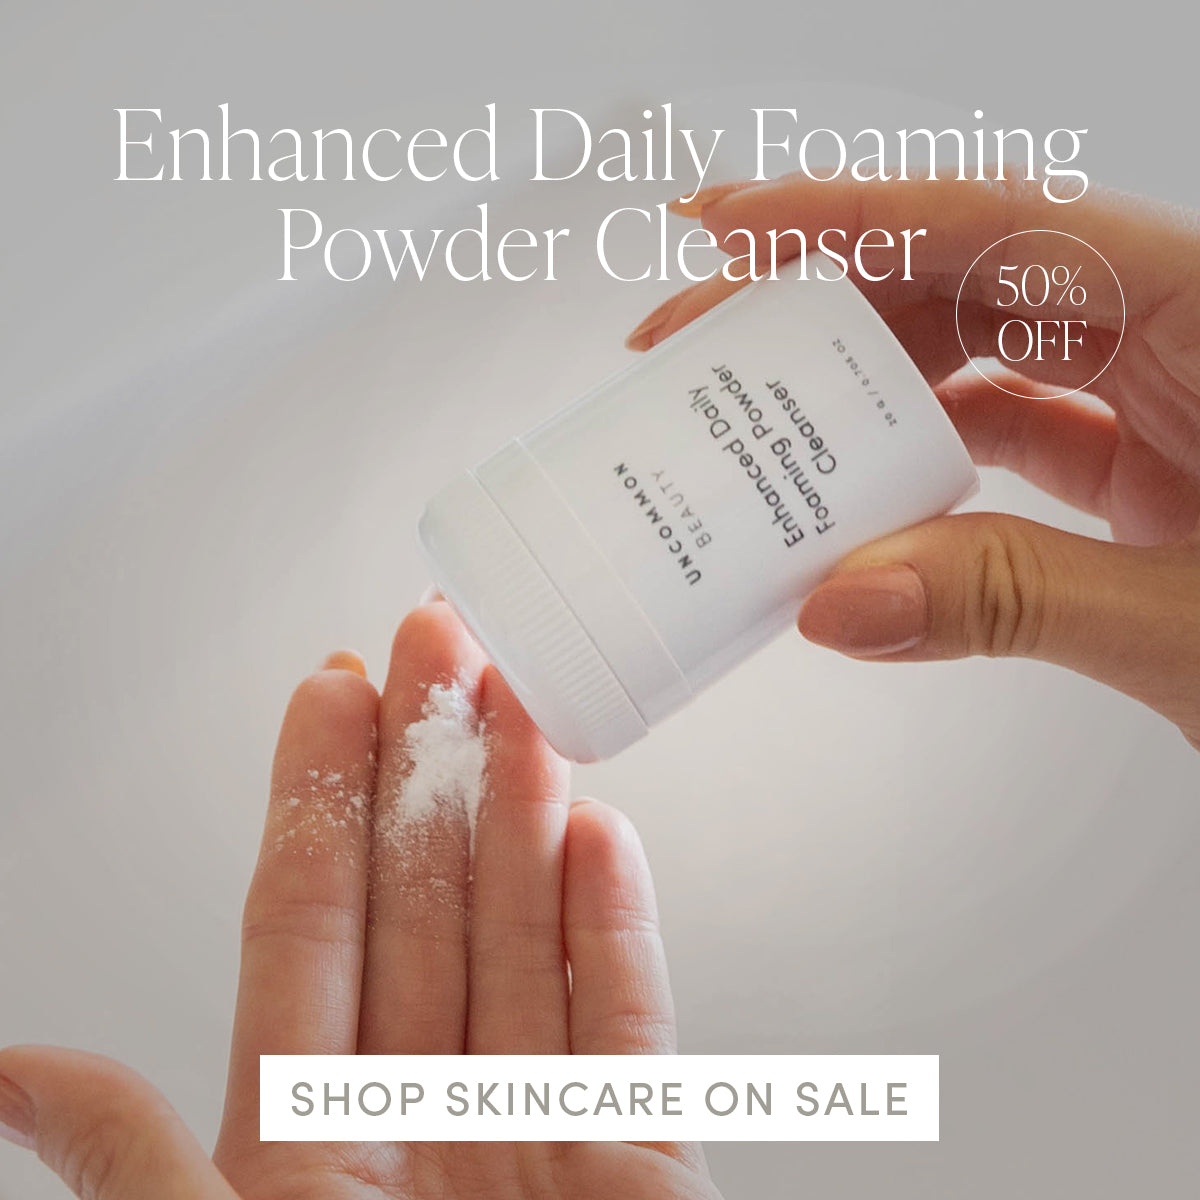 Enhanced Daily Foaming Powder Cleanser | 50% Off | Shop Skincare On Sale | Uncommon Beauty